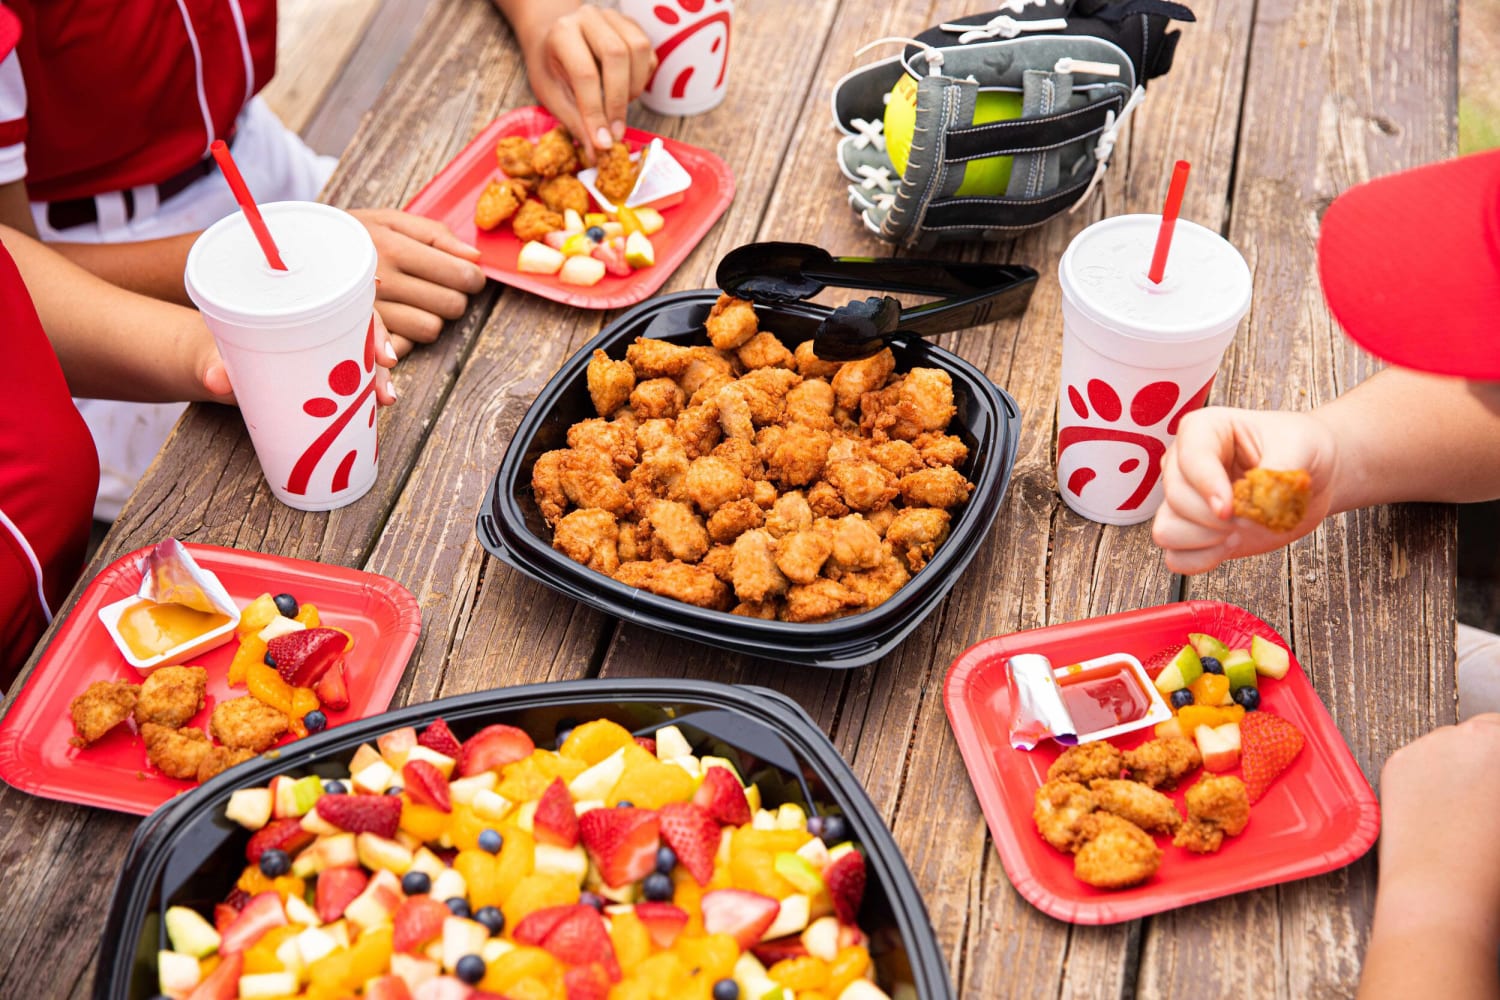 Yes, you can order catering from Chick-fil-A — here's how